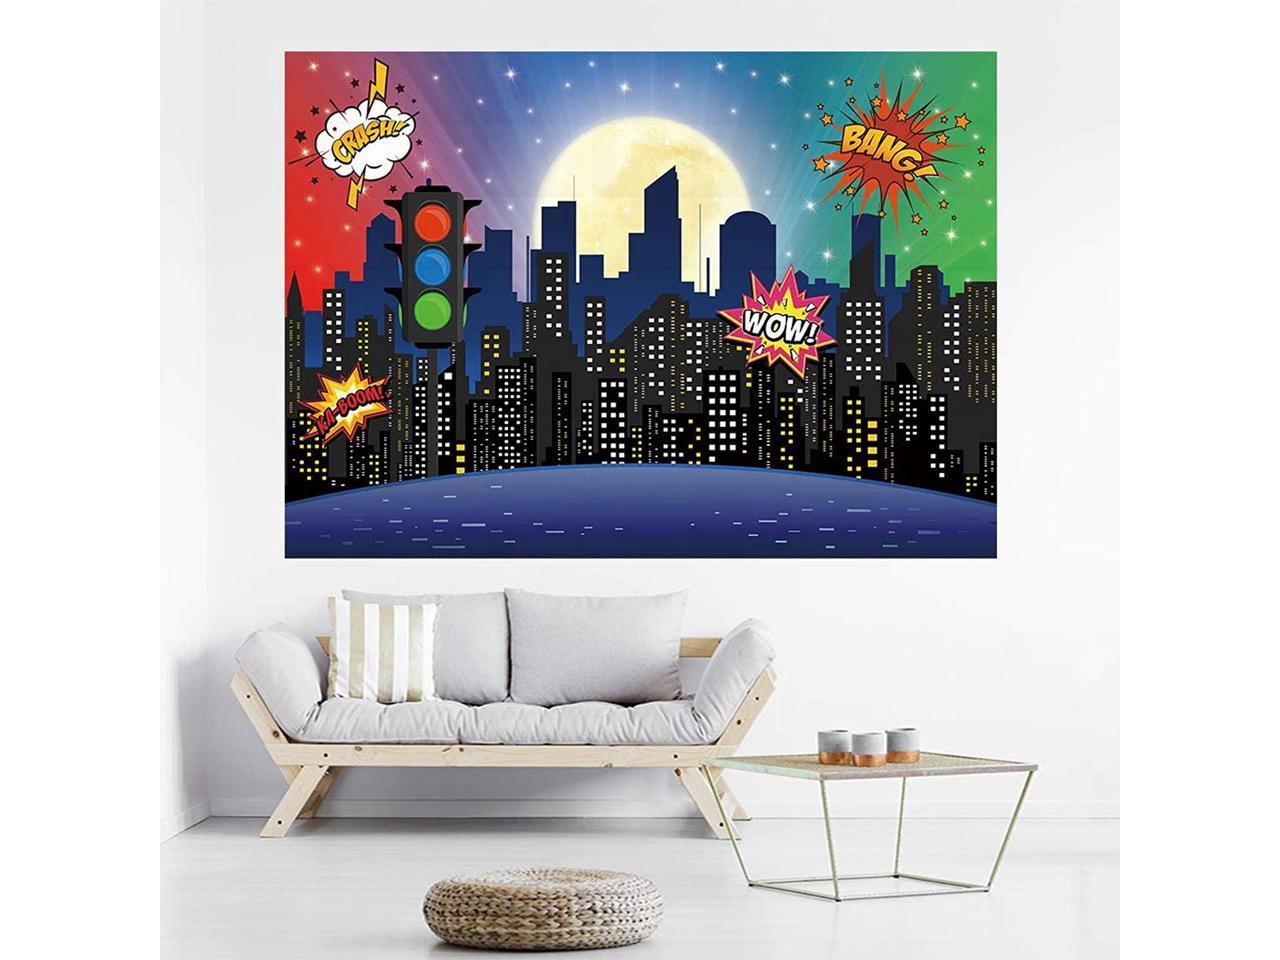 Night 6x8 FT Backdrop Photographers,City Skyline Silhouette Skyscrapers Abstract Graphic Architecture Urban Life Background for Child Baby Shower Photo Vinyl Studio Prop Photobooth Photoshoot 